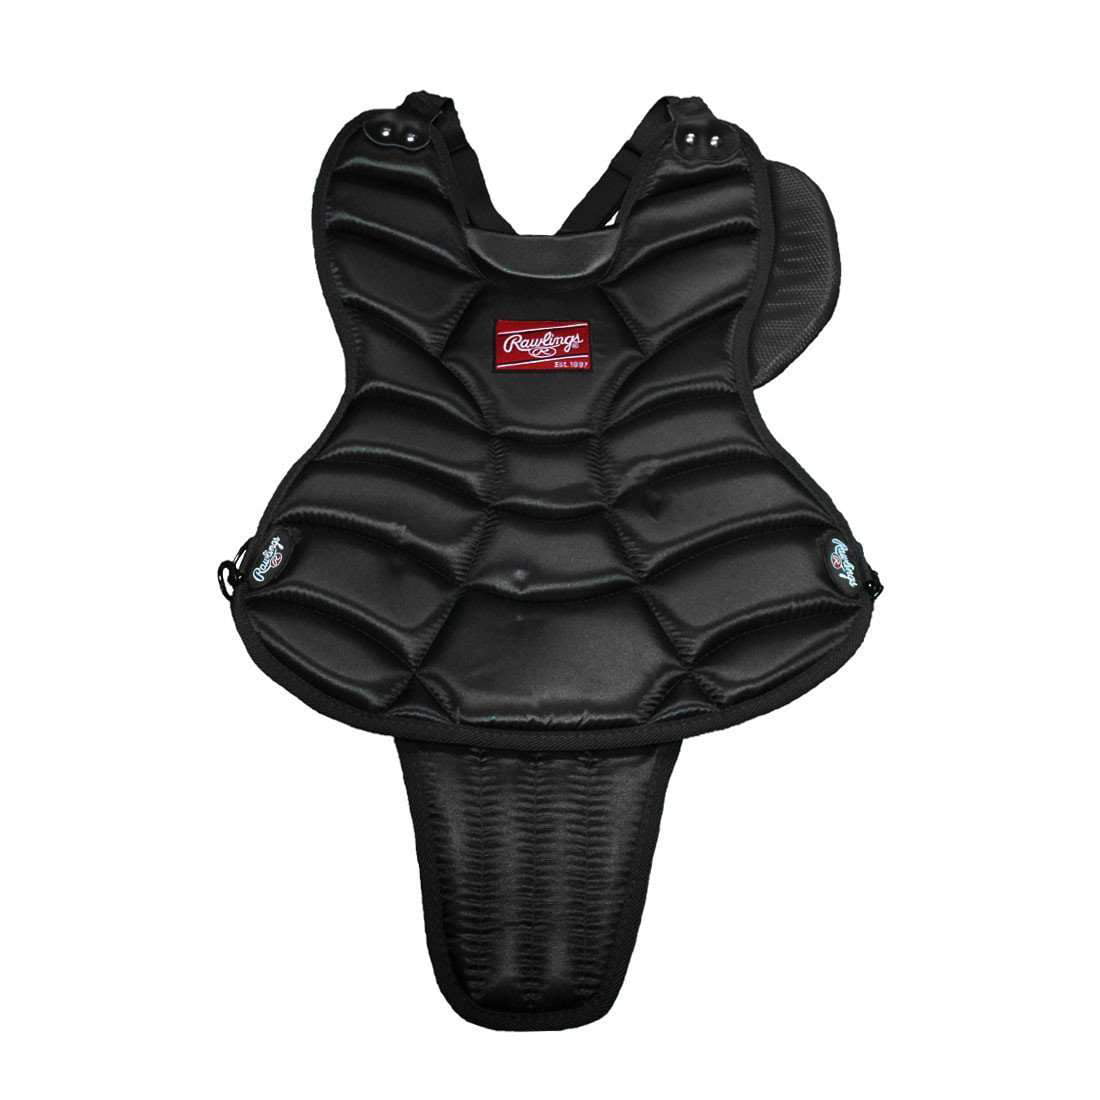 Rawlings Players Youth/Intermediate 12 Chest Protector 